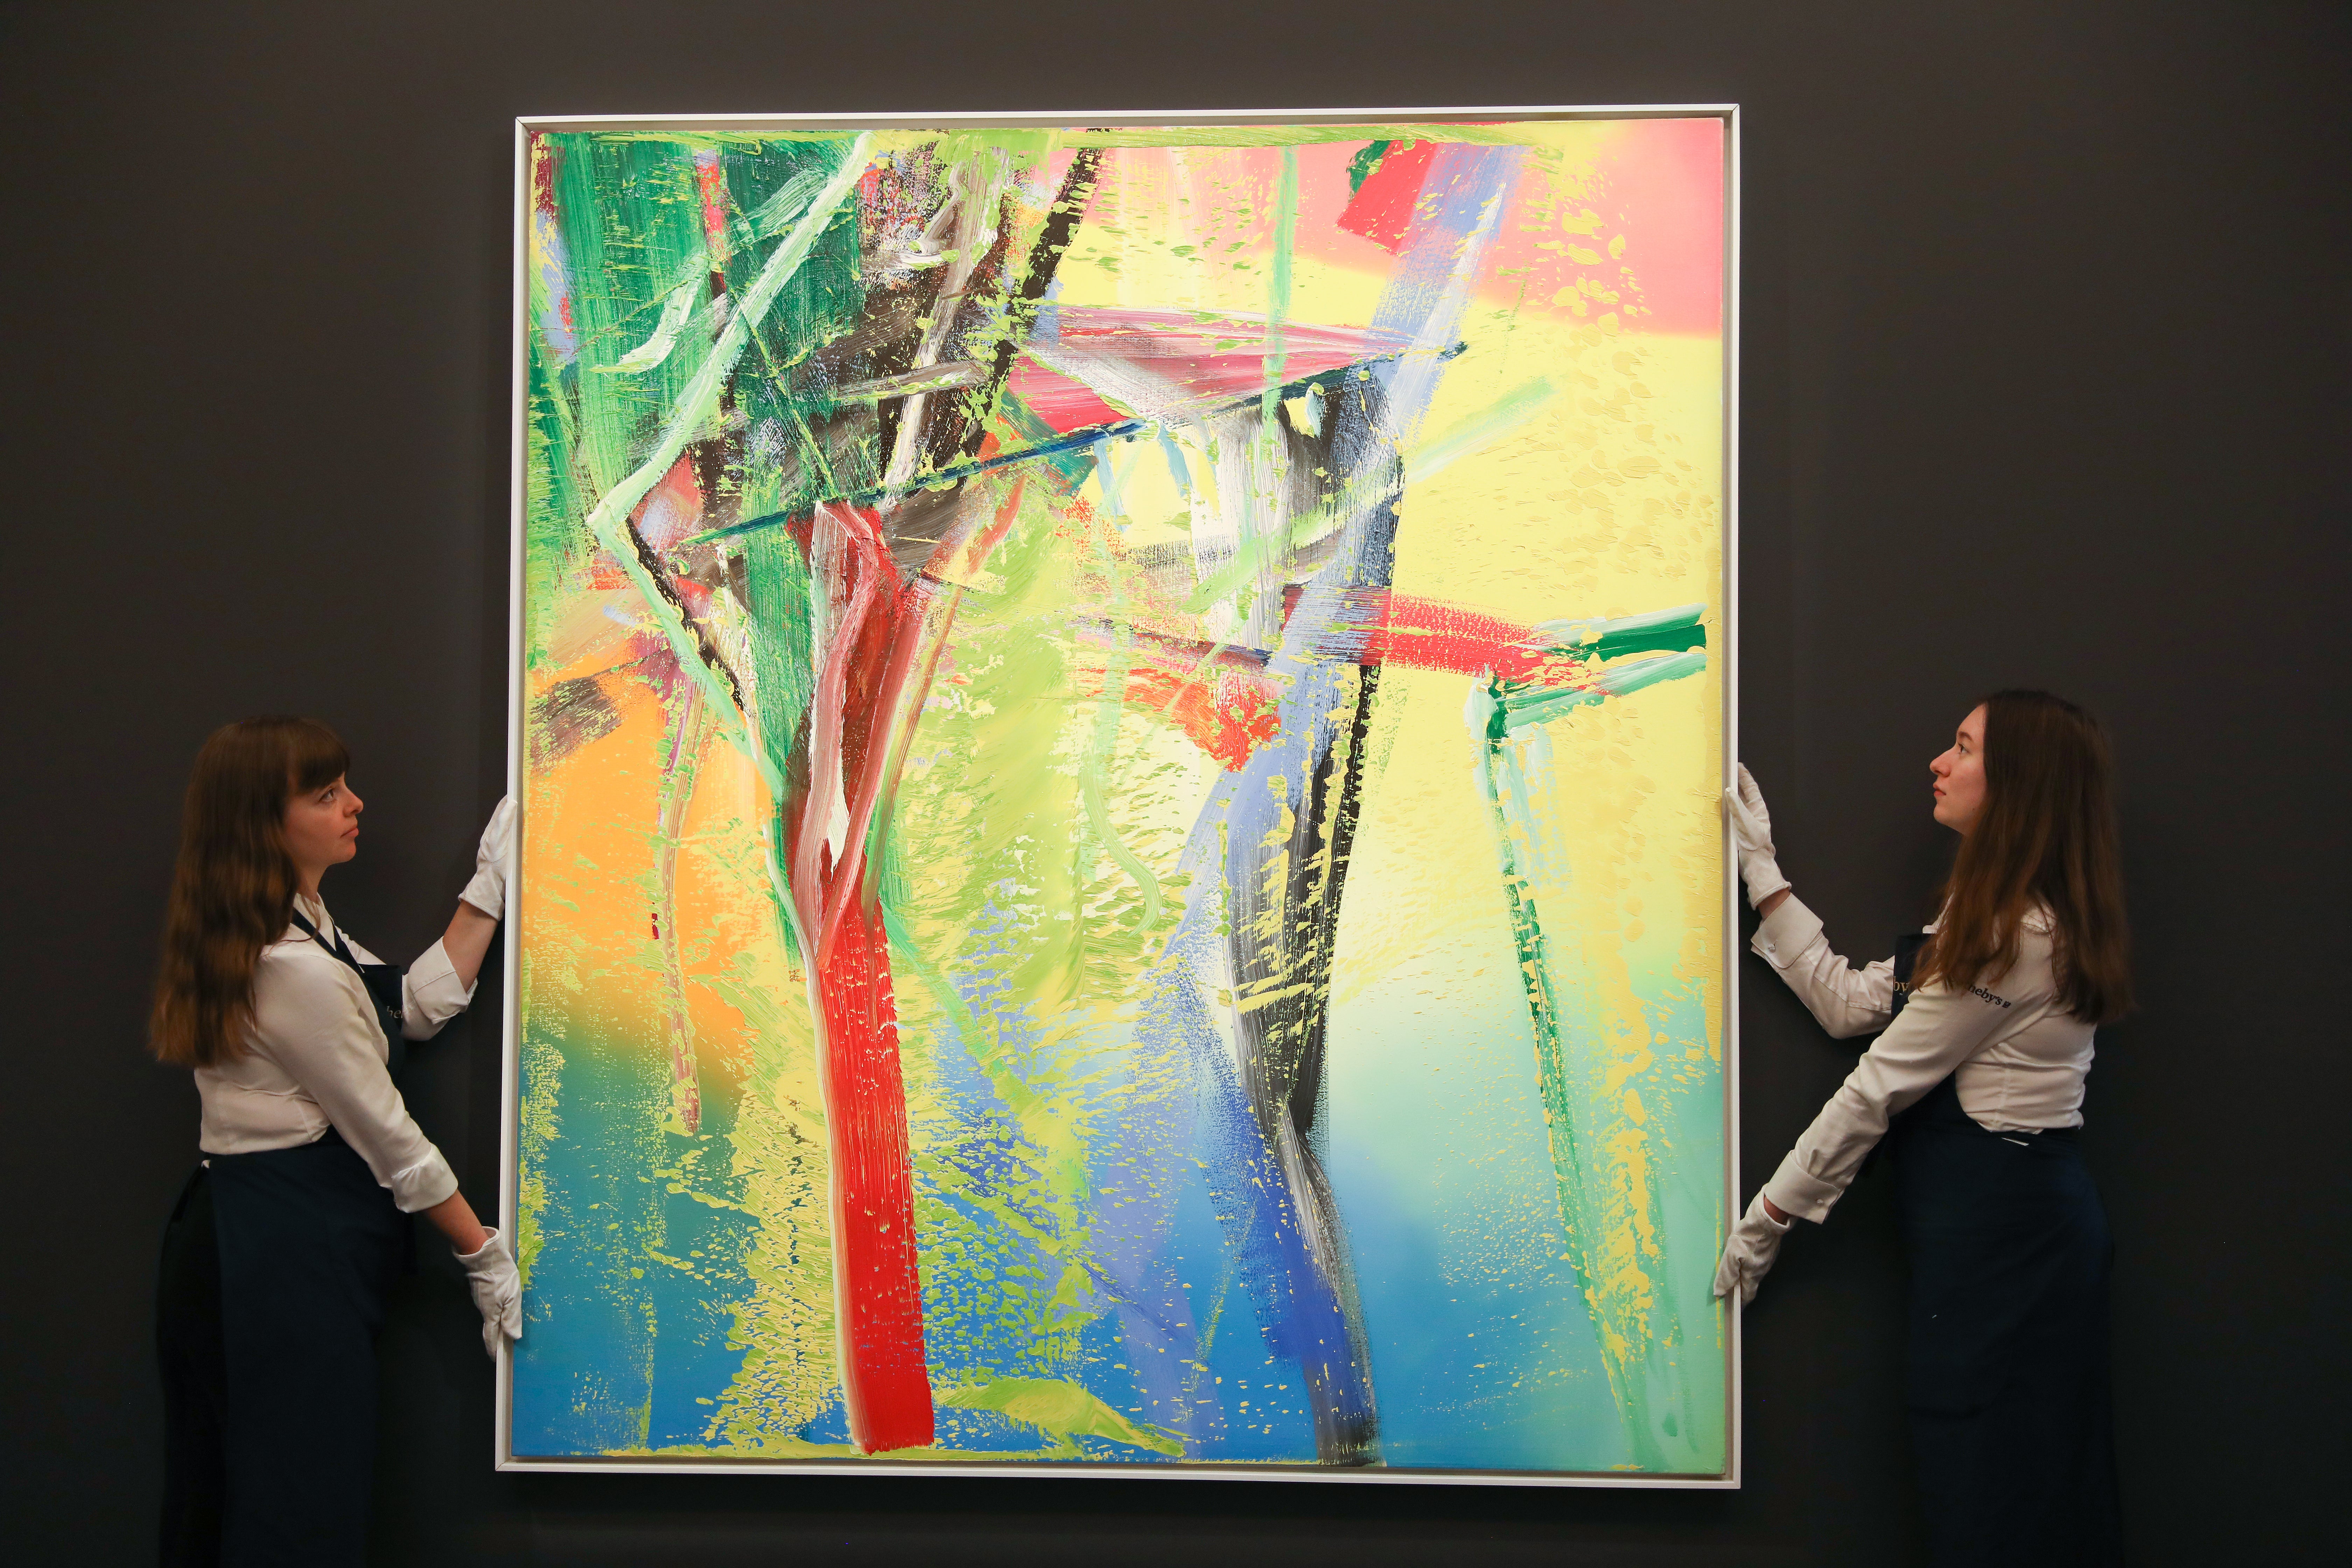 Gerhard Richter knows a painting is done when he has no more ideas of what to add or to destroy